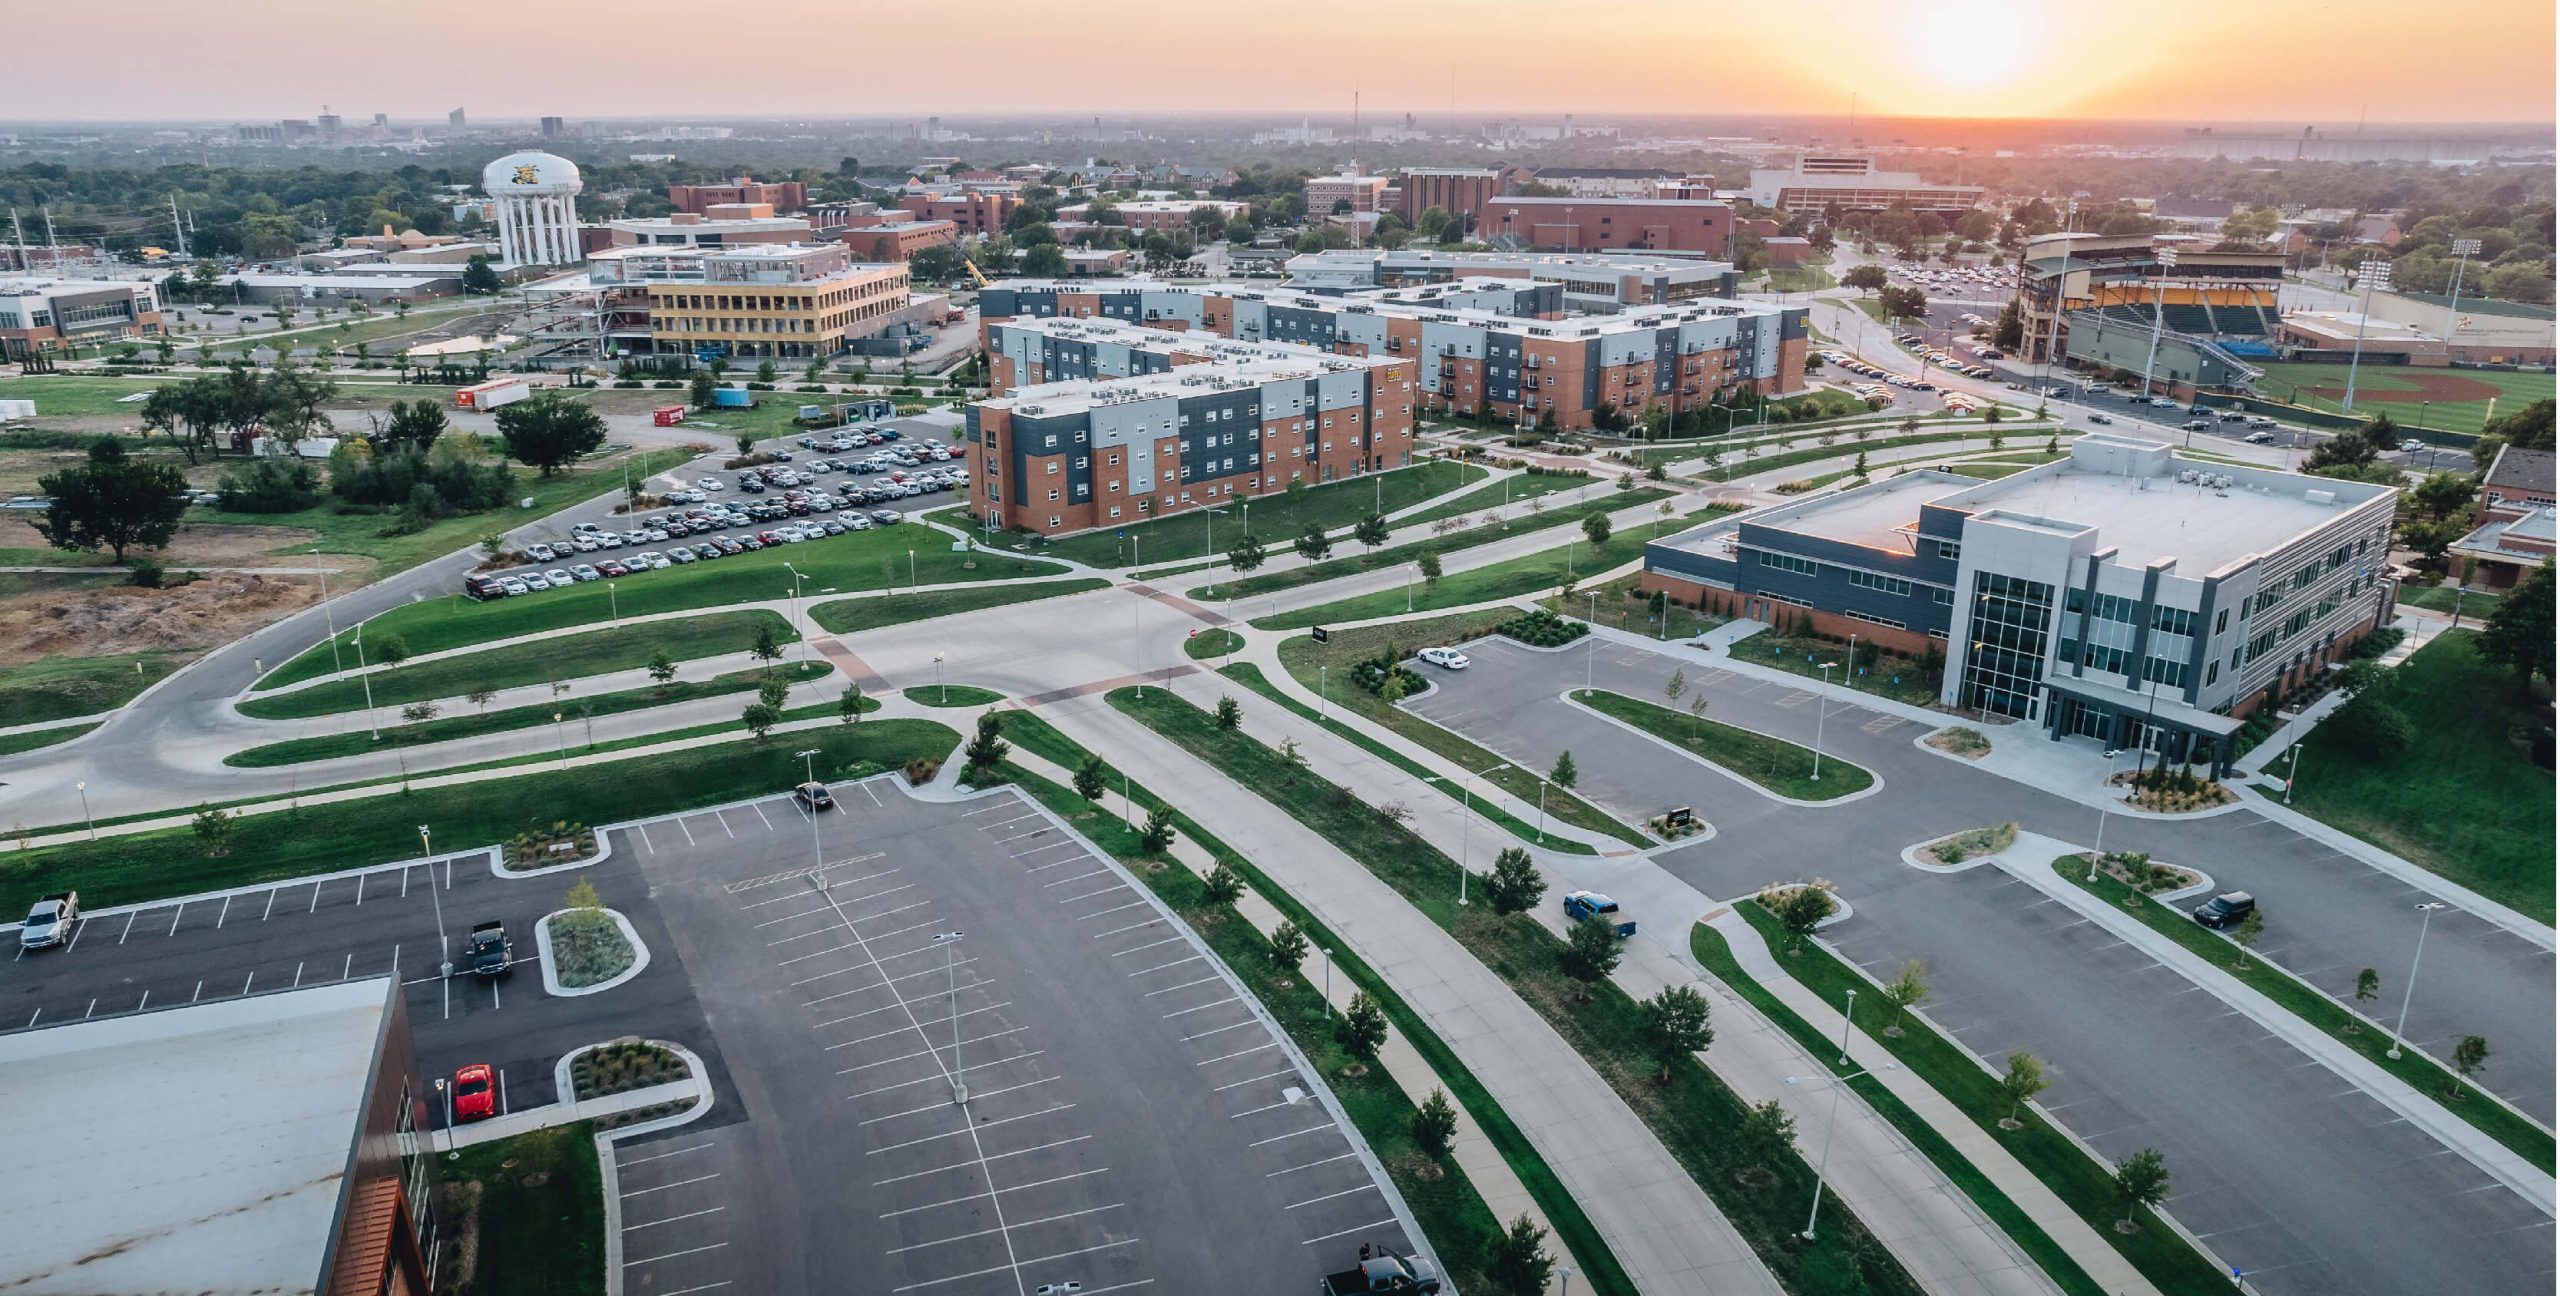 Wichita State University innovation campus aerial picture